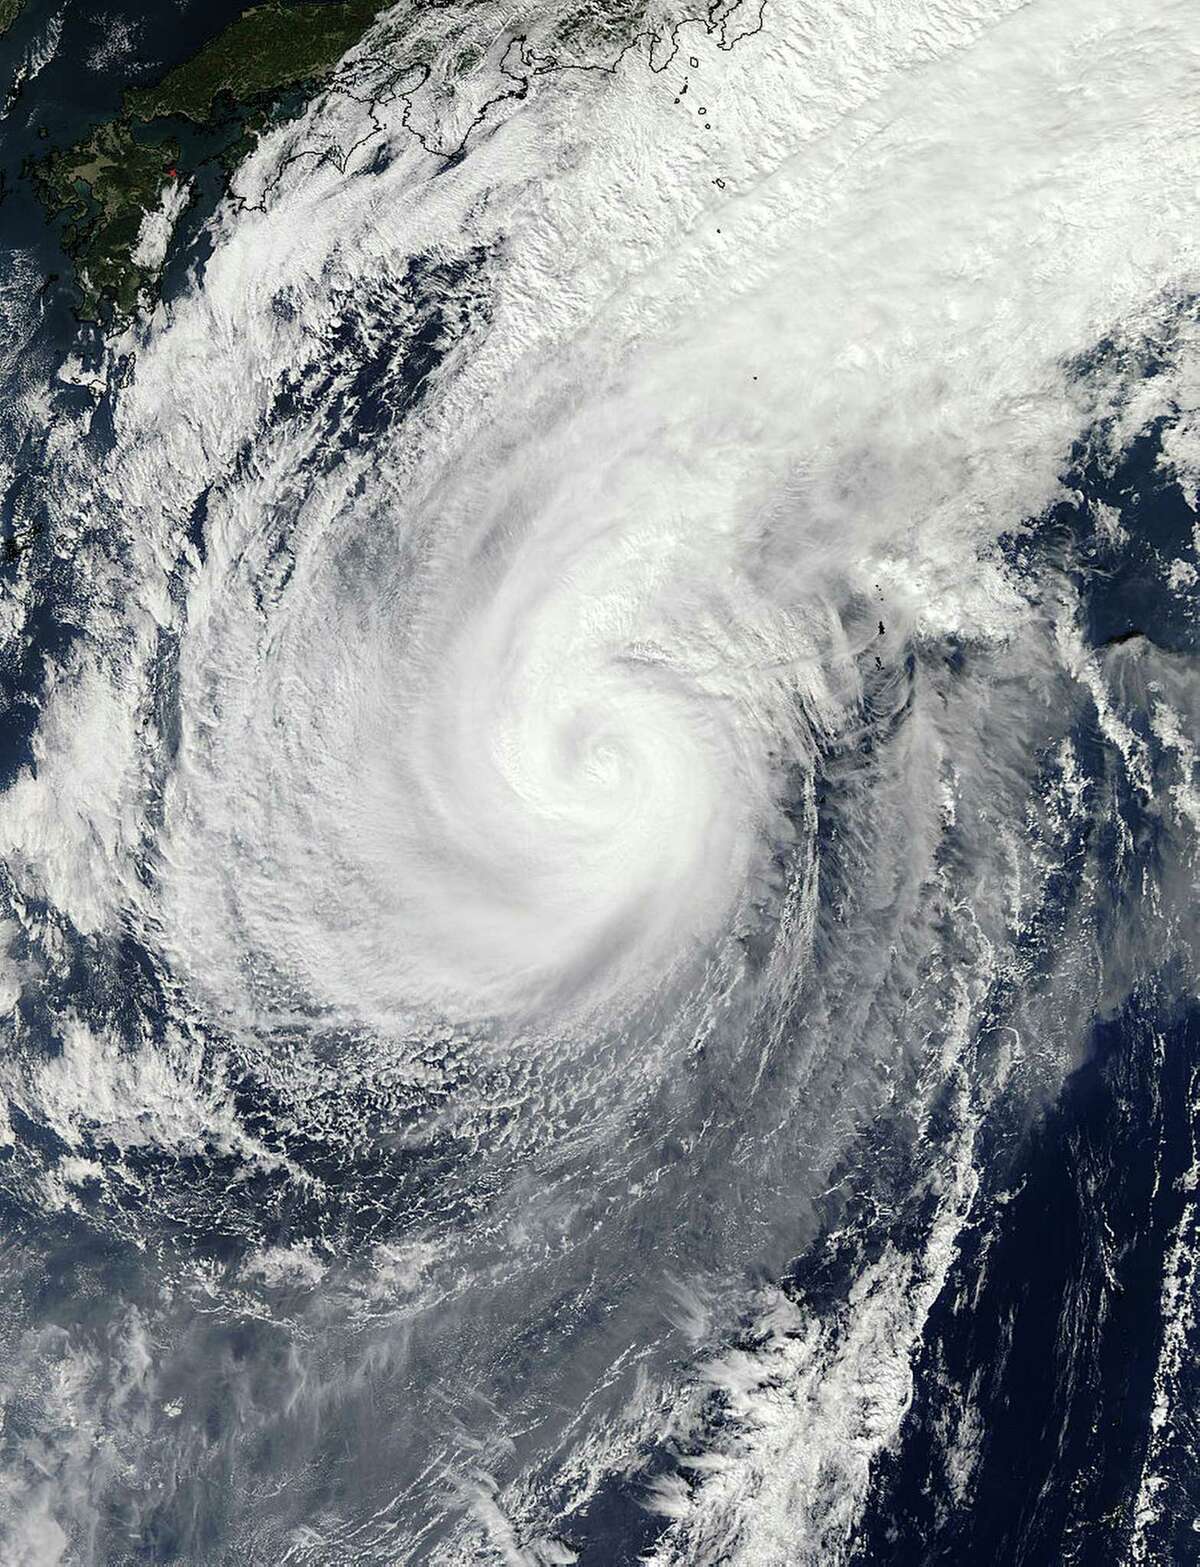 This Nov. 5, 2014 photo provided by NASA shows a picture captured by NASA’s Aqua satellite of Typhoon Nuri. Weather forecasters say an explosive storm, a remnant of Typhoon Nuri, surpassing the intensity of 2012’s Superstorm Sandy is heading toward the northern Pacific Ocean and expected to pass Alaska’s Aleutian Islands over the weekend.